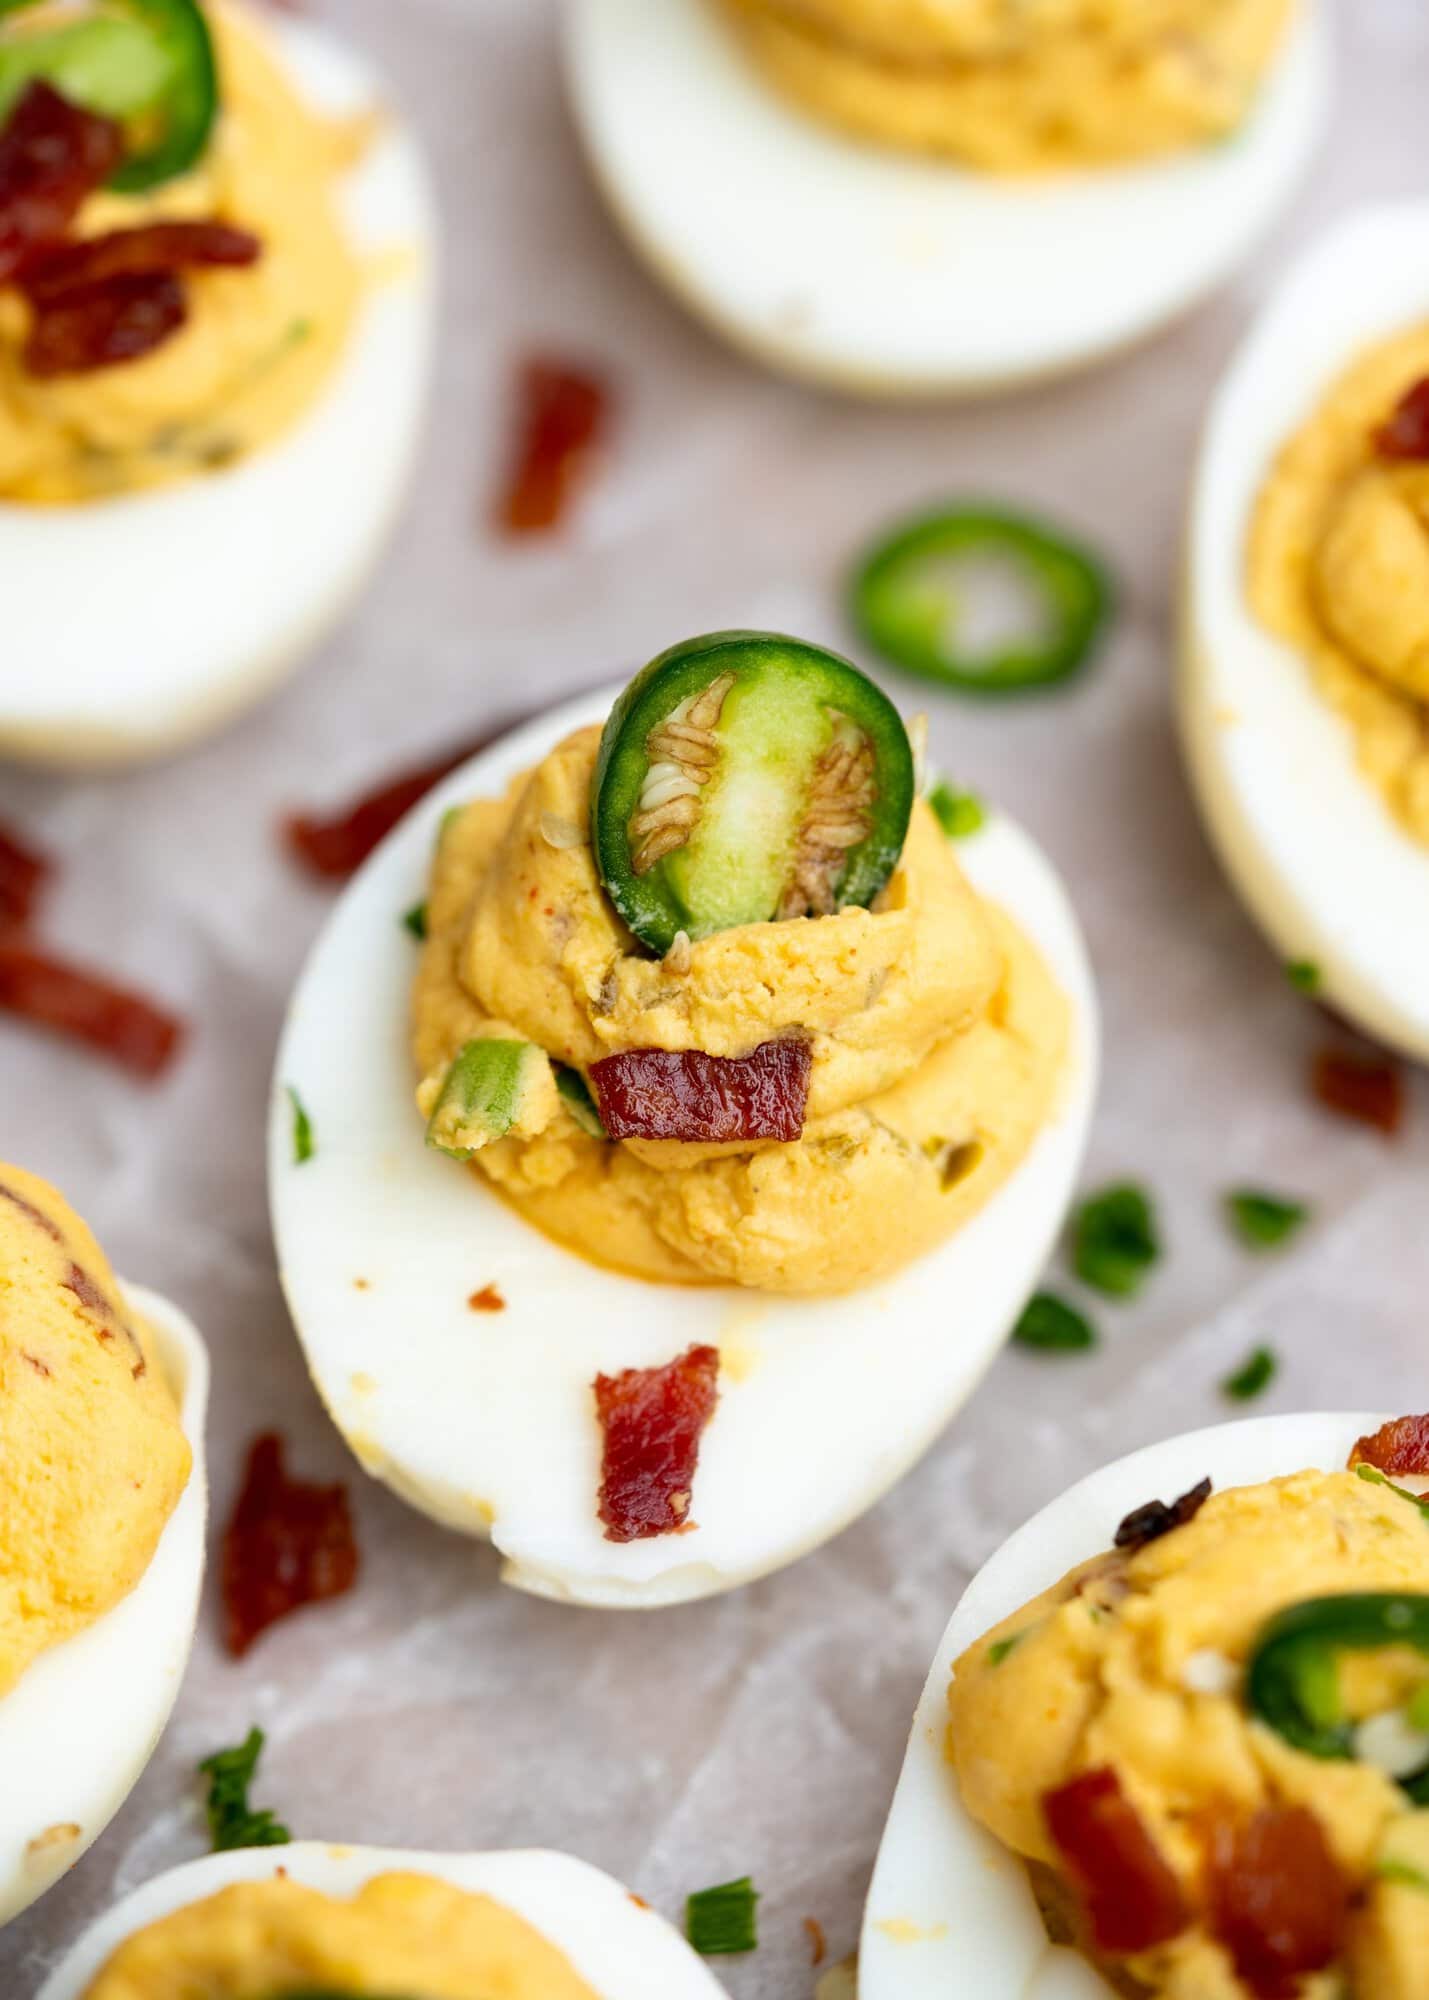 Close up view of a deviled egg with yolk, mayo and cheese stuffing and garnished with jalapeno's and bacon bits.